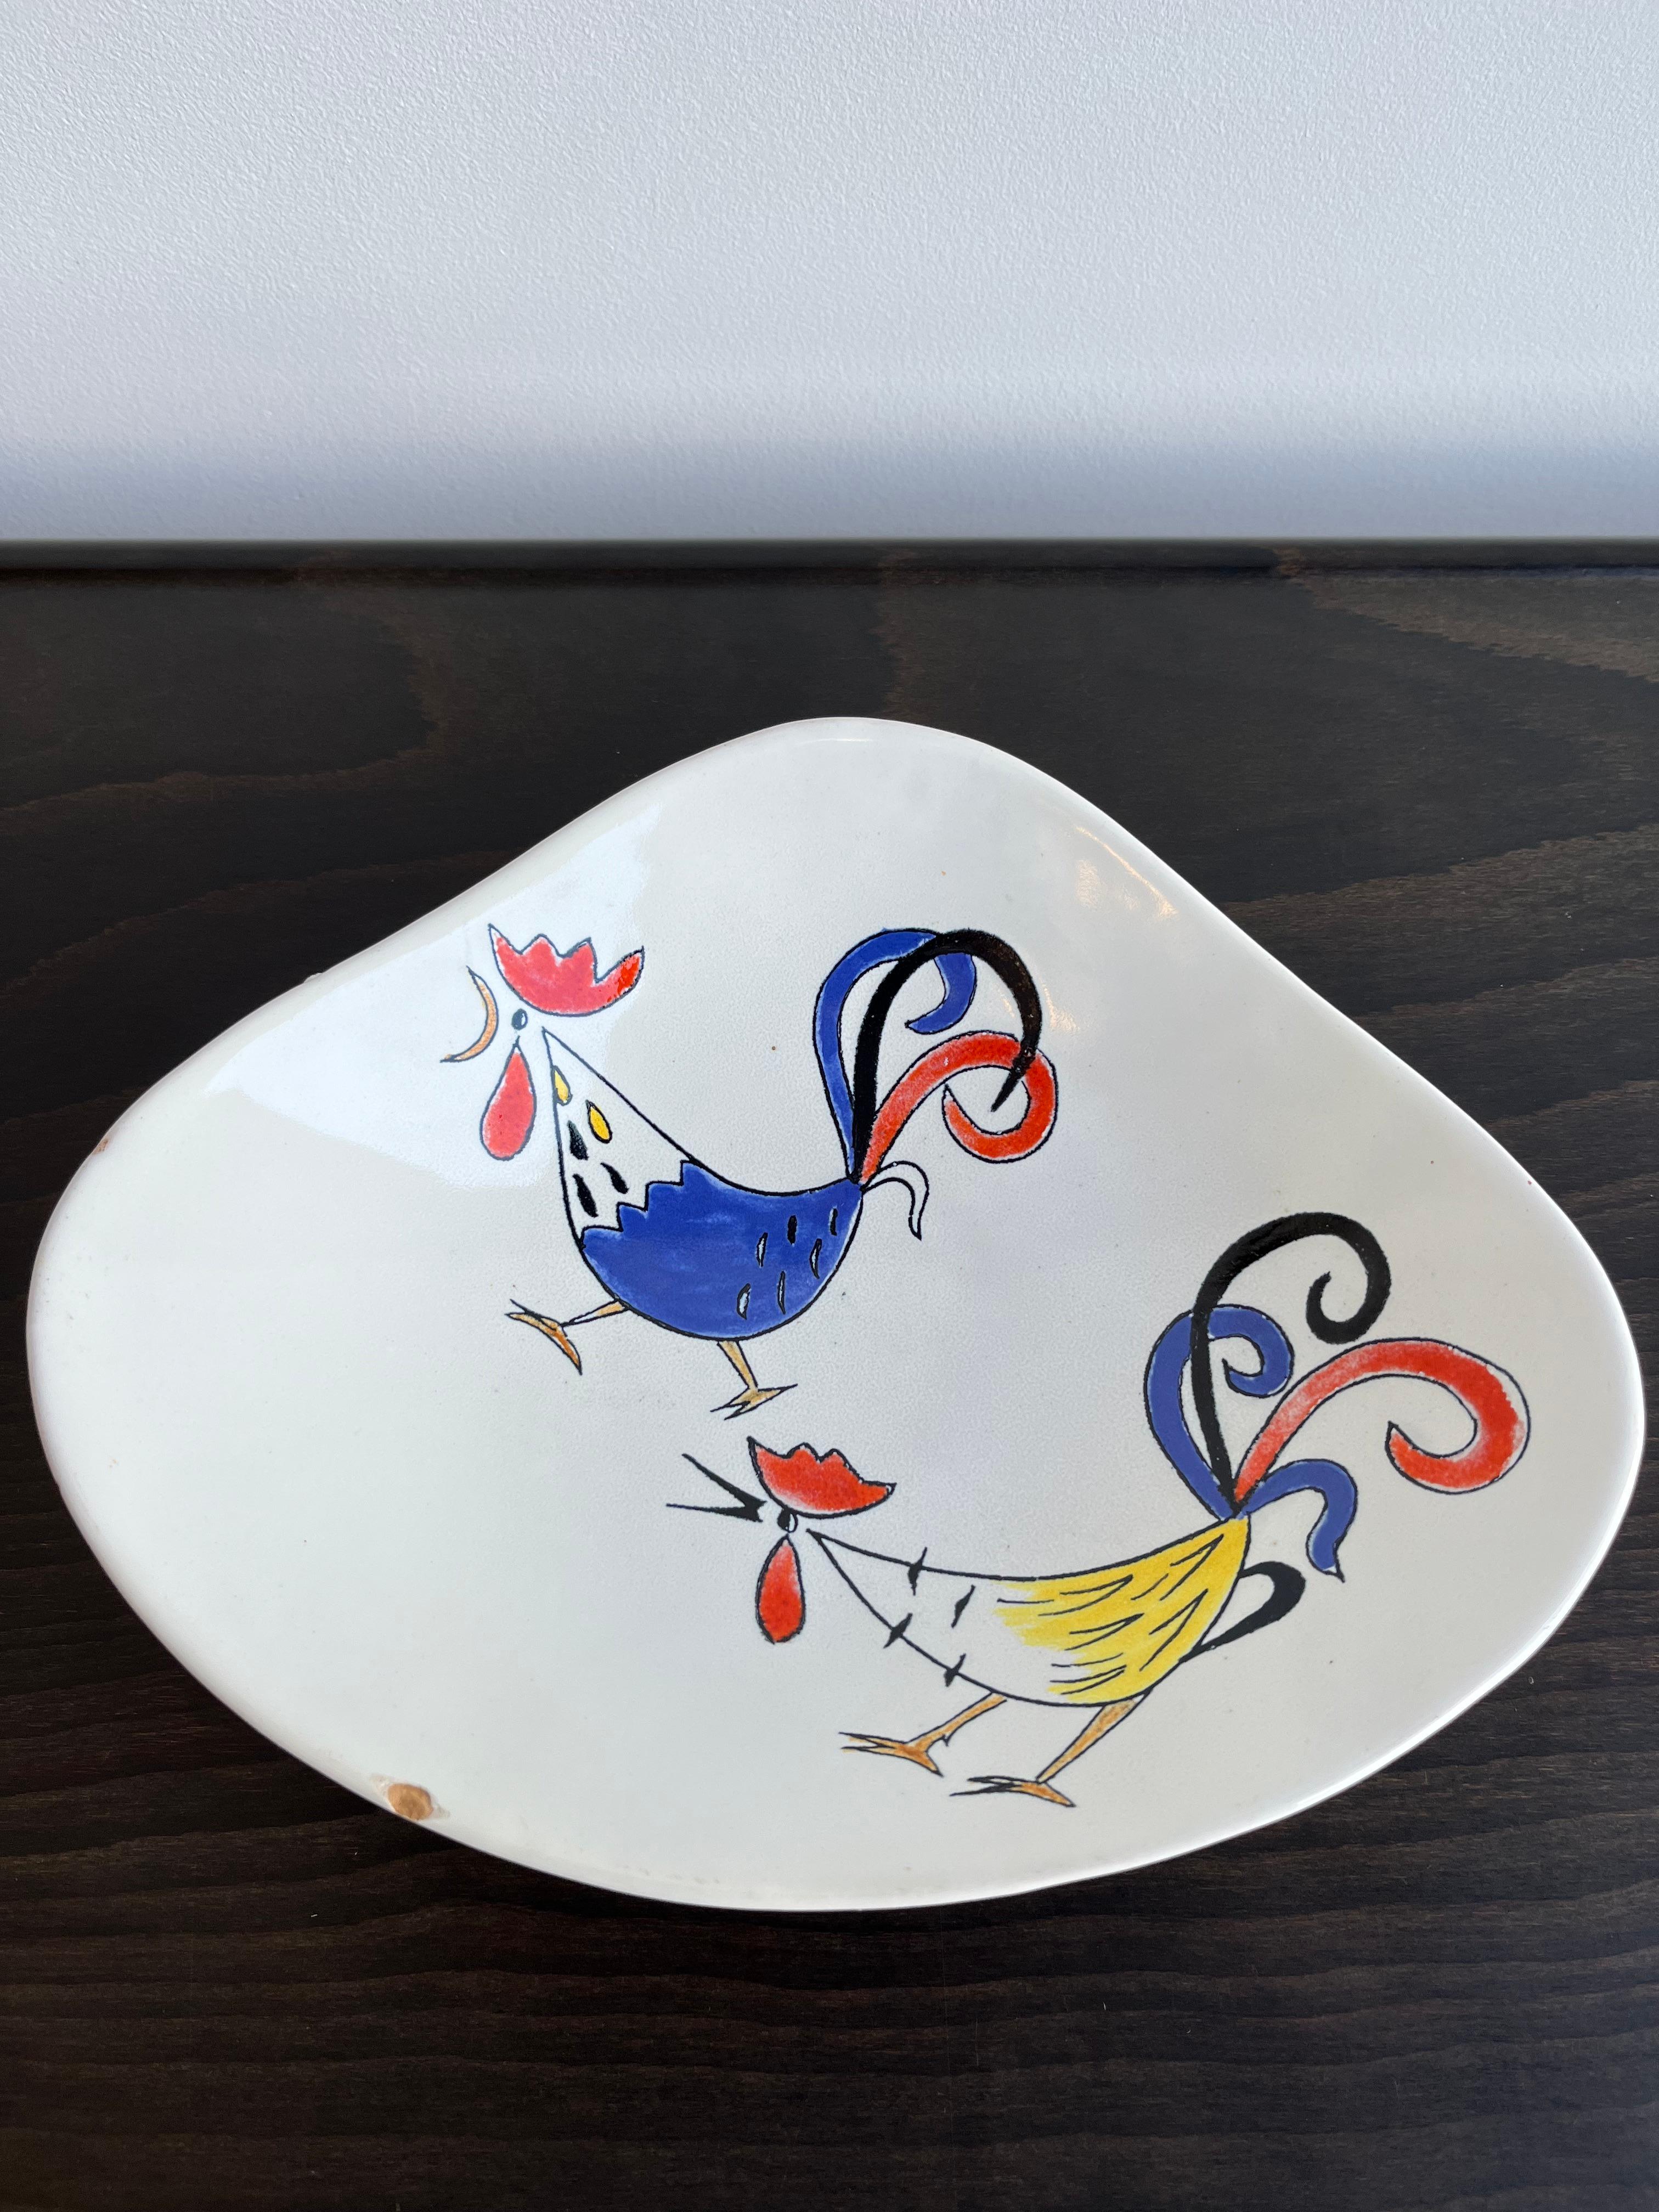 Hand-Crafted Italian Ceramic Bowl by Rometti 1970s For Sale